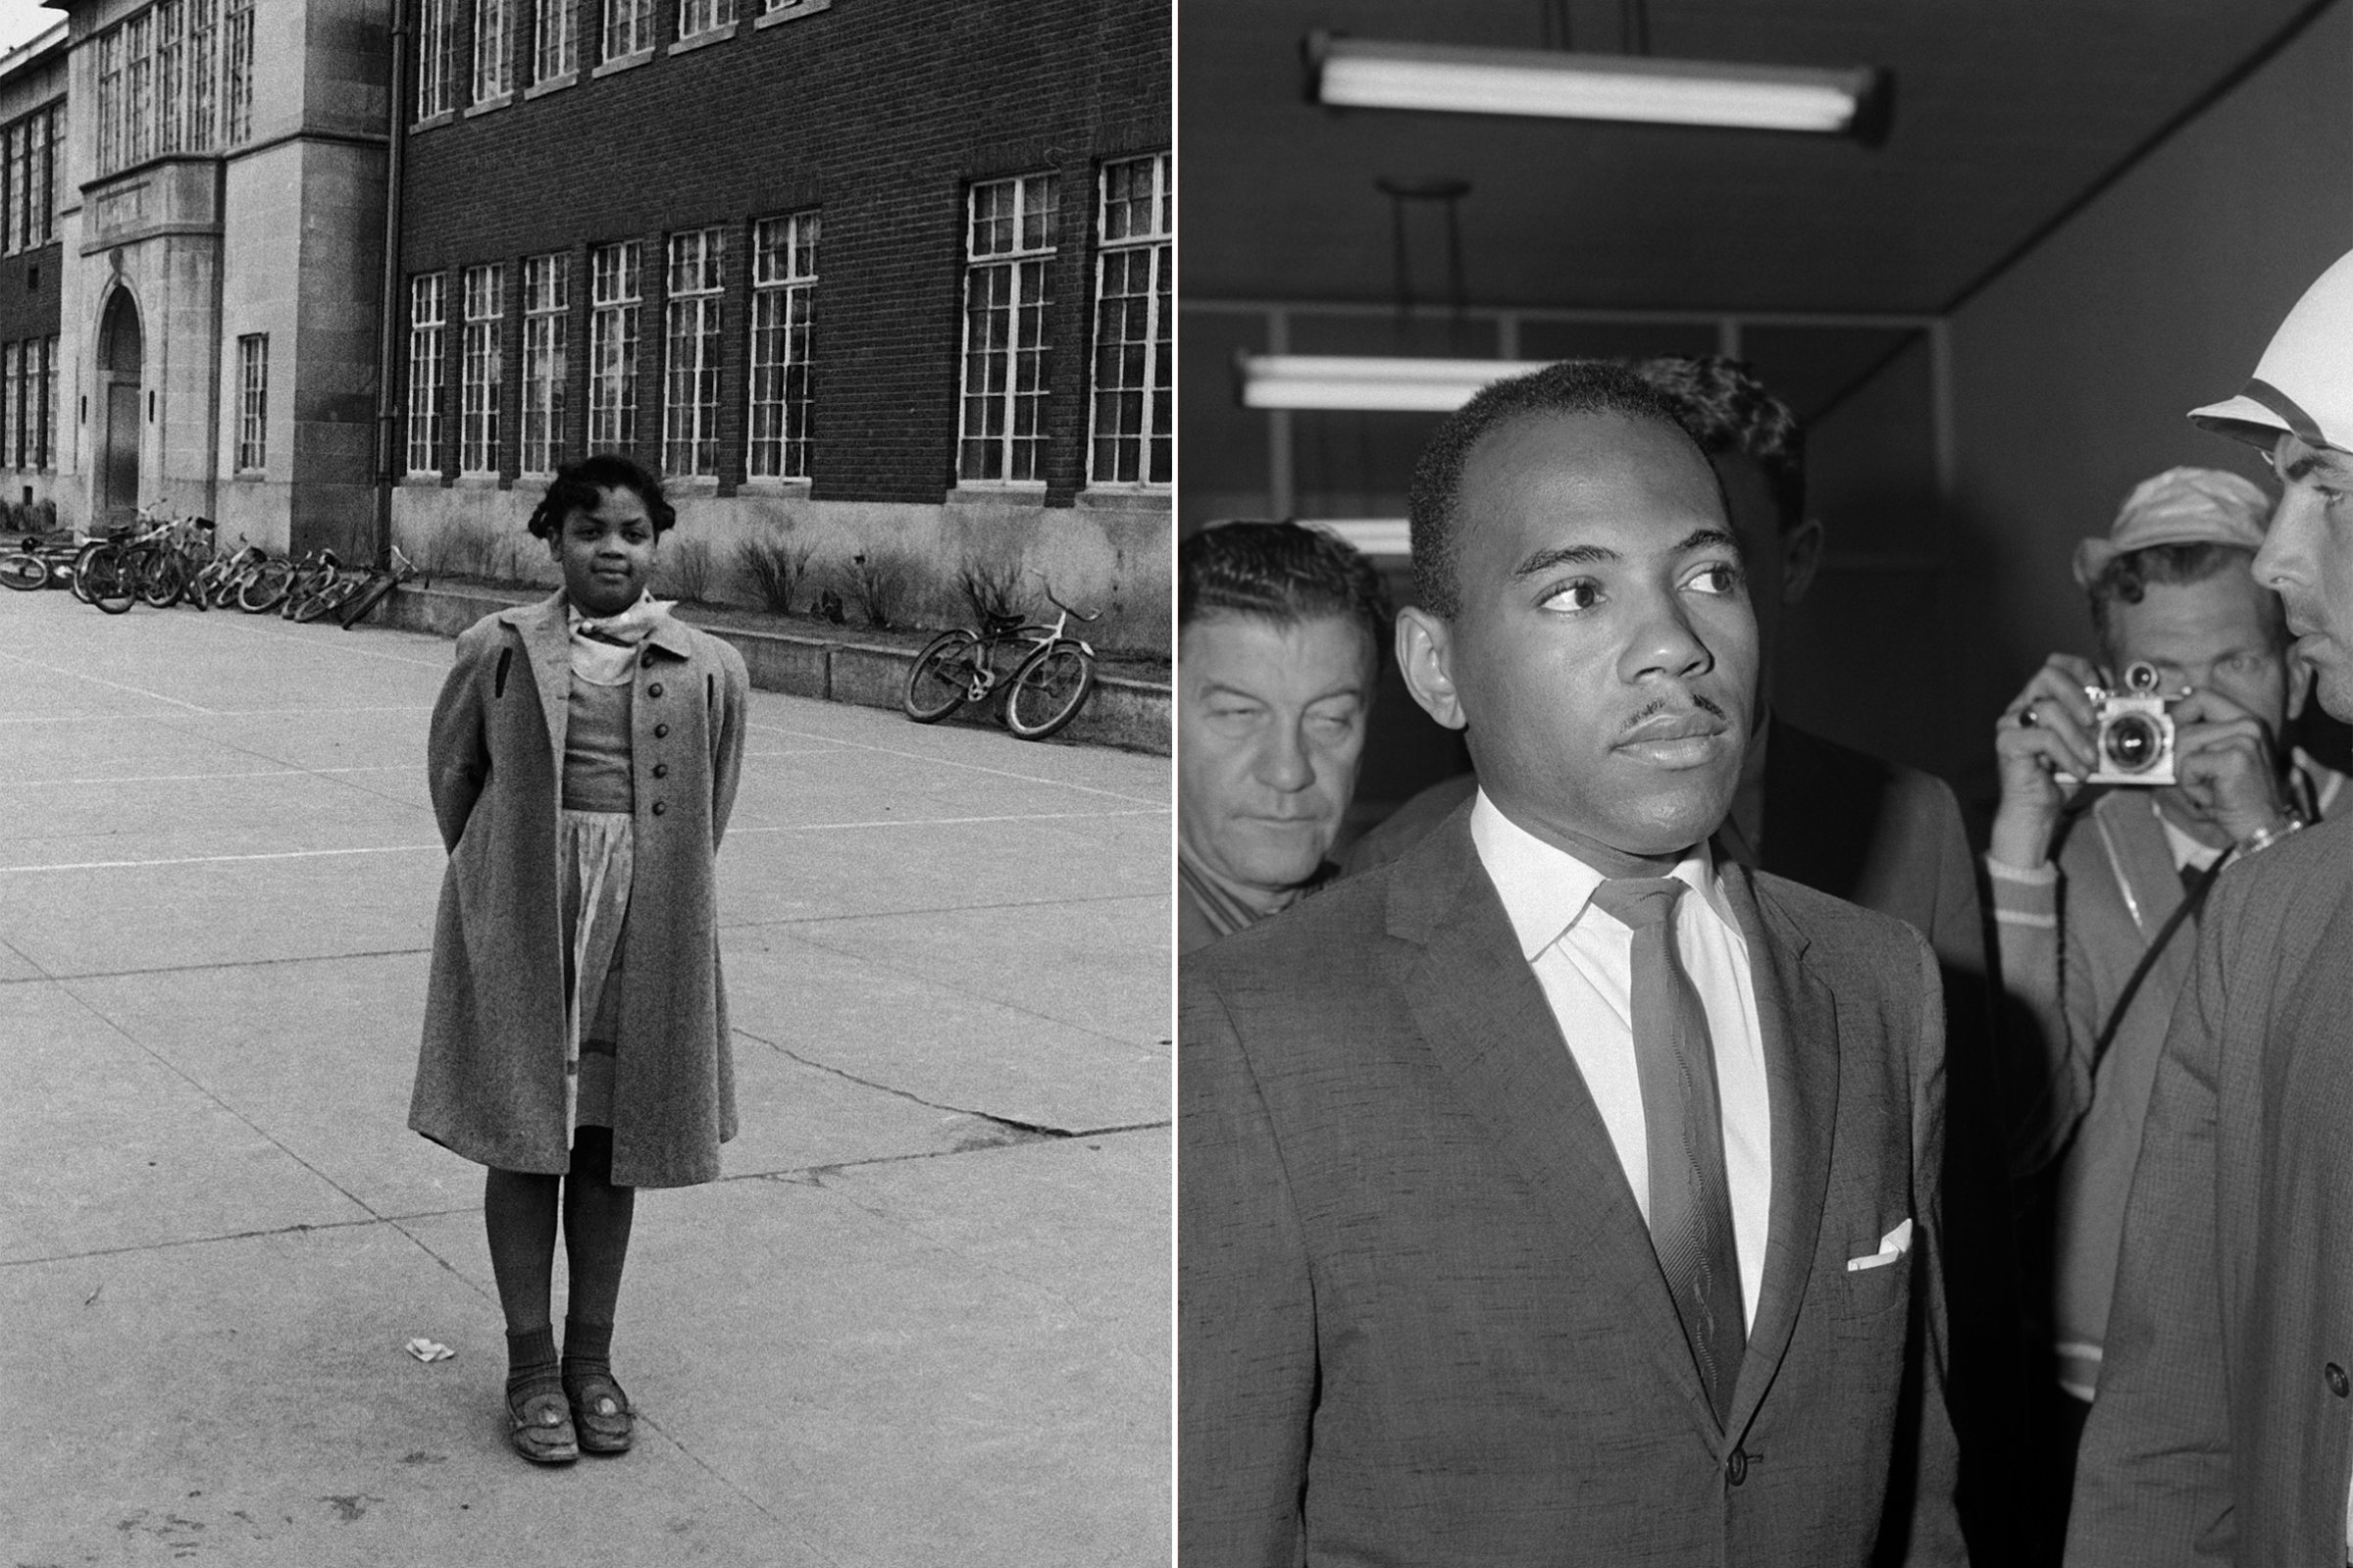 James Meredith First African American to attend the all-white Ole Miss in 1963, Lind Brown was at the center of Brown V. Board of Education